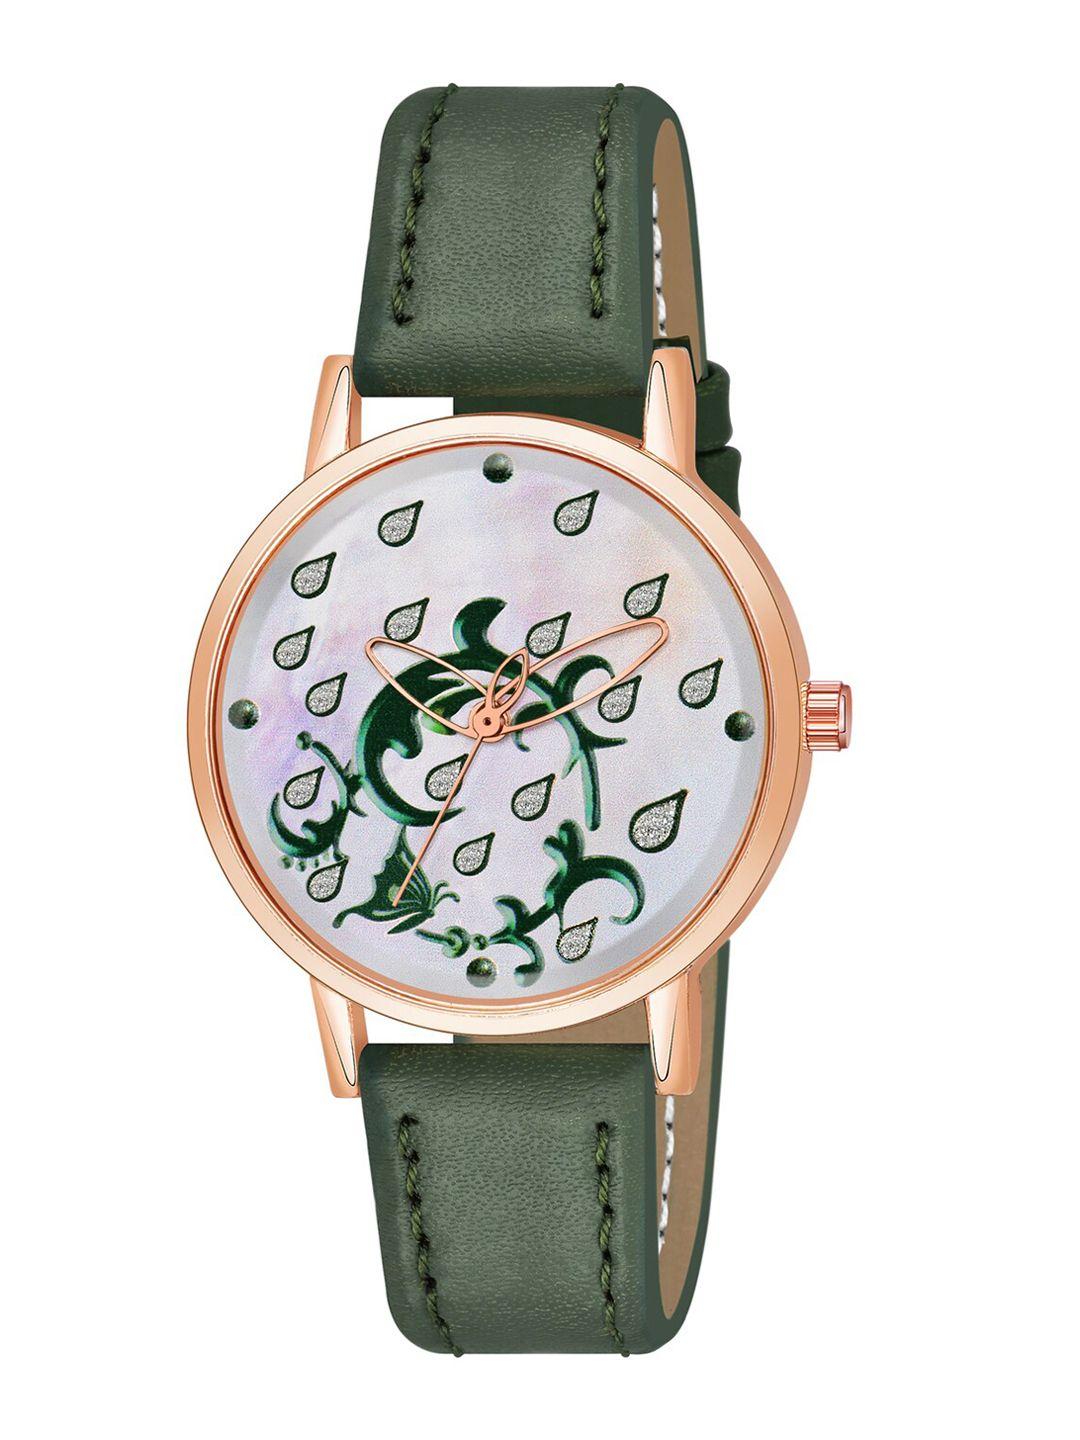 wuxi women brass printed dial & leather straps analogue watch m-876 green